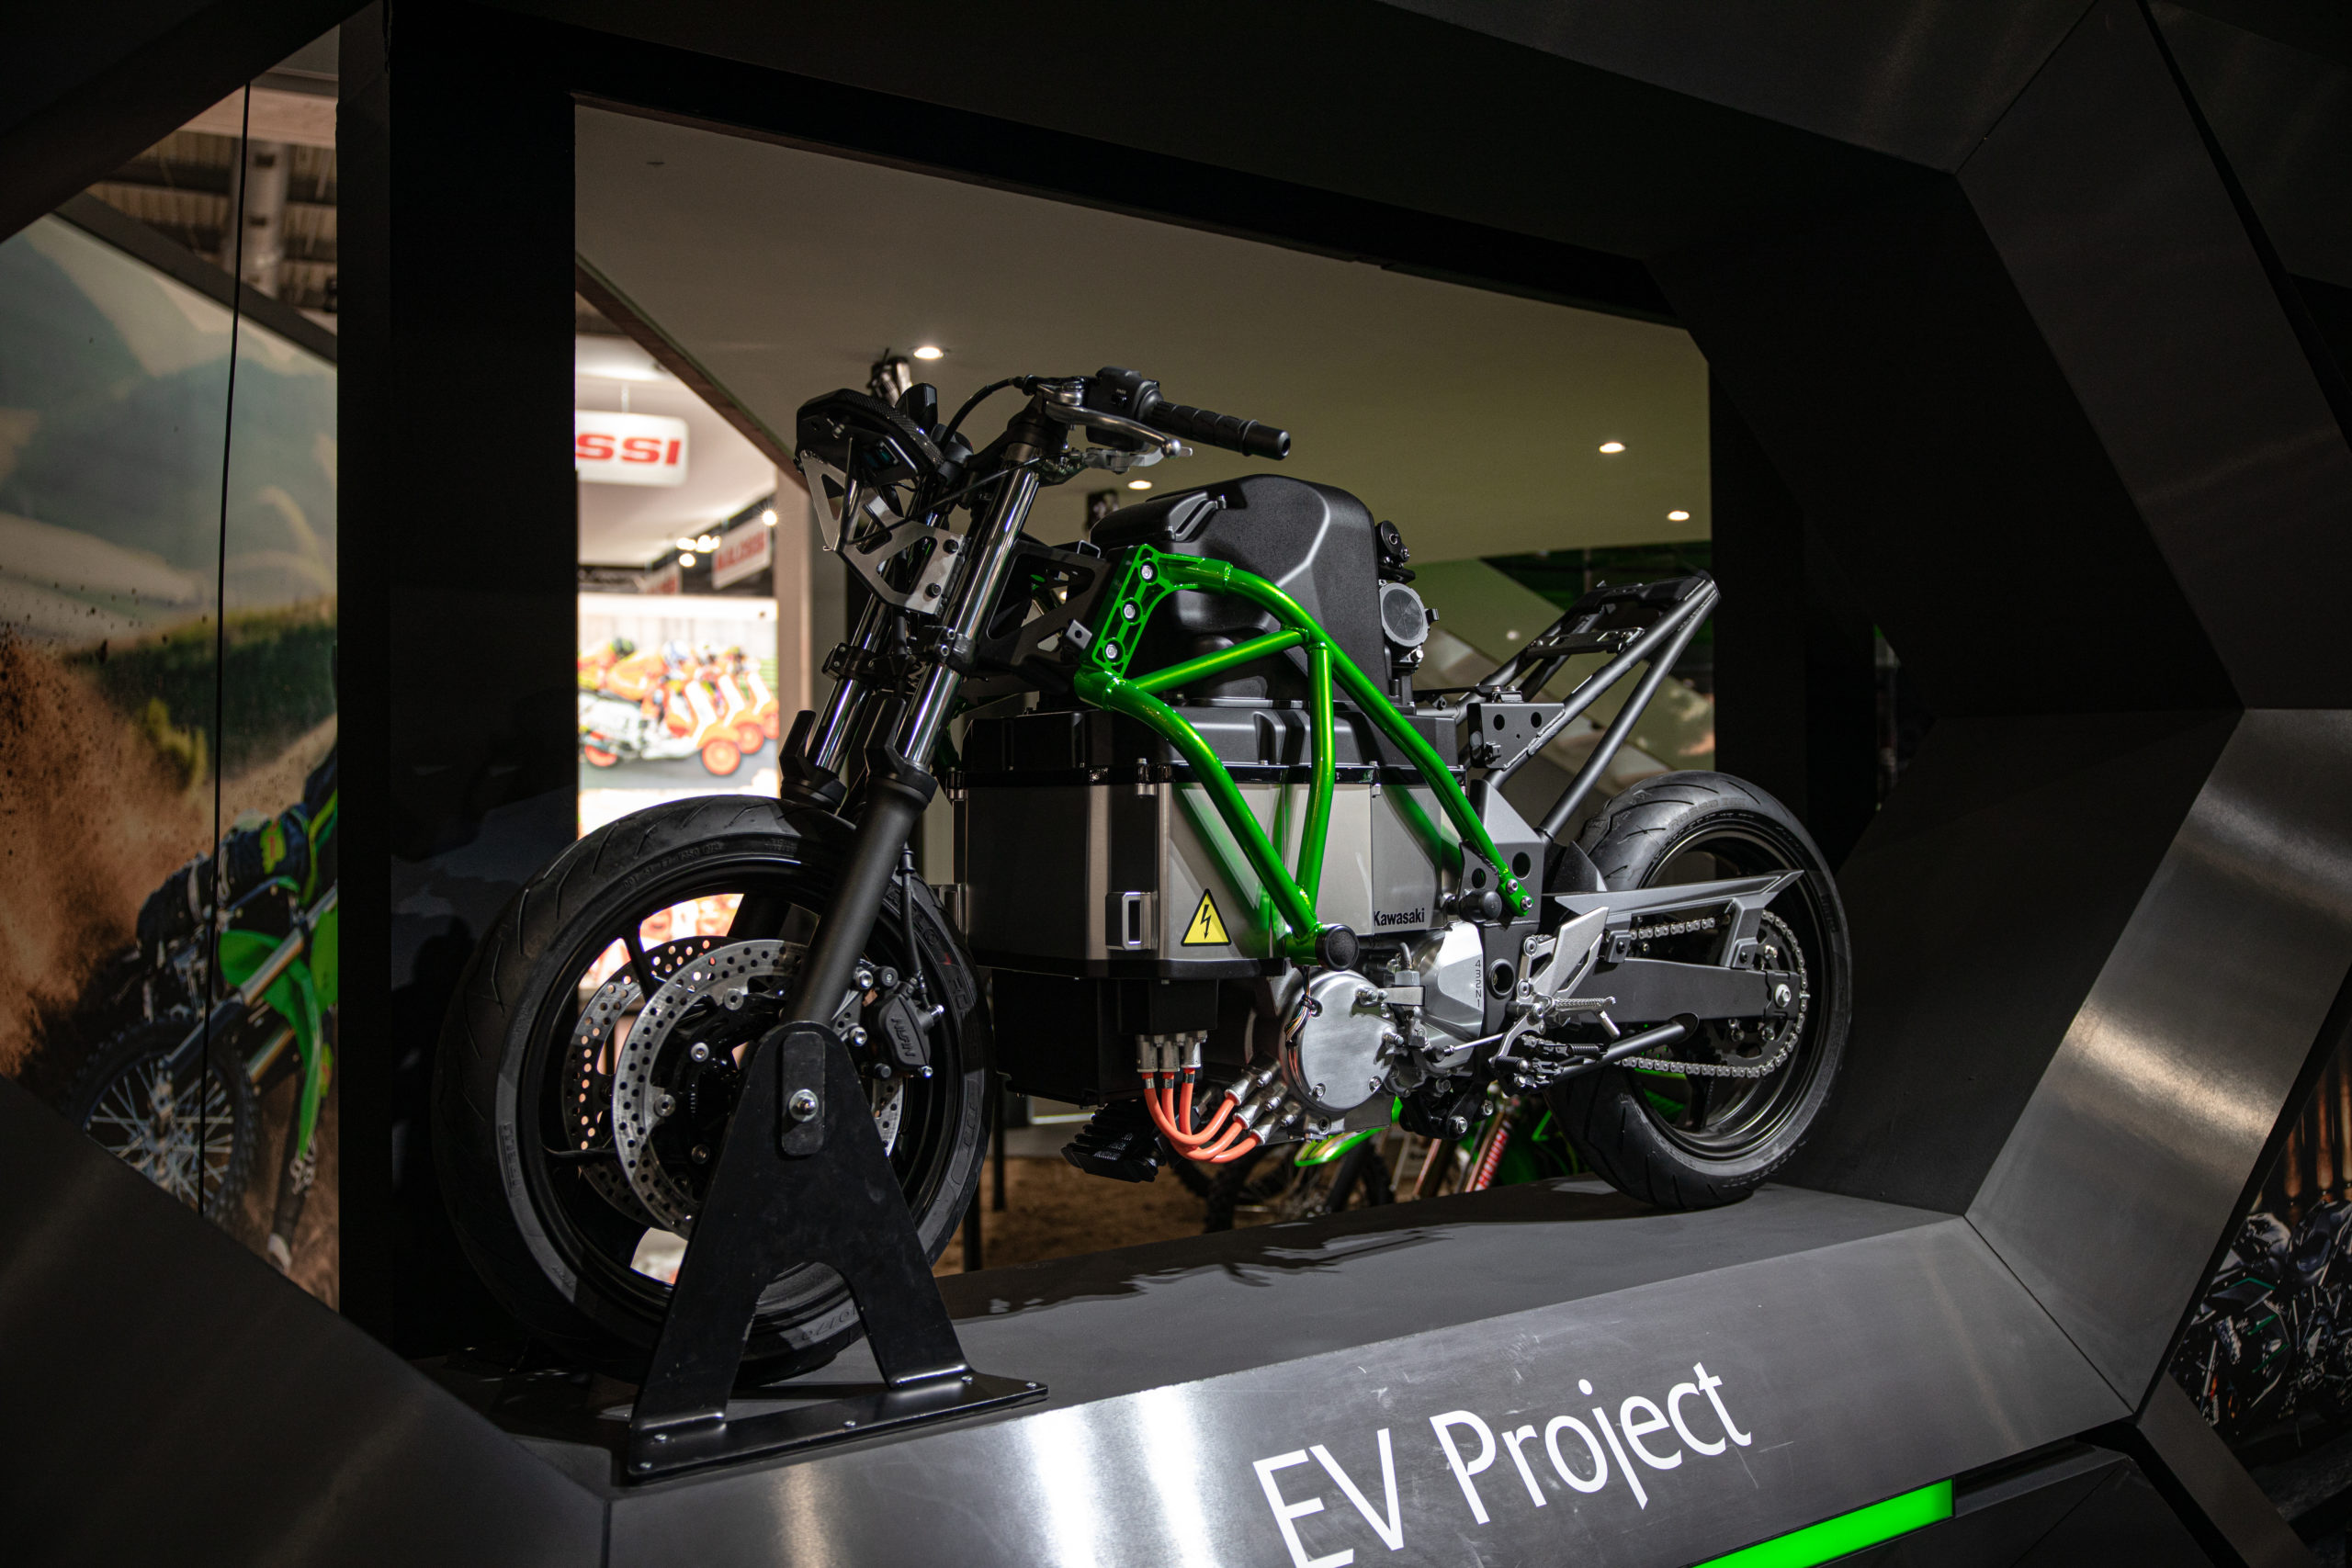 Kawasaki electric motorcycle concept at the 2019 EICMA show in Milan